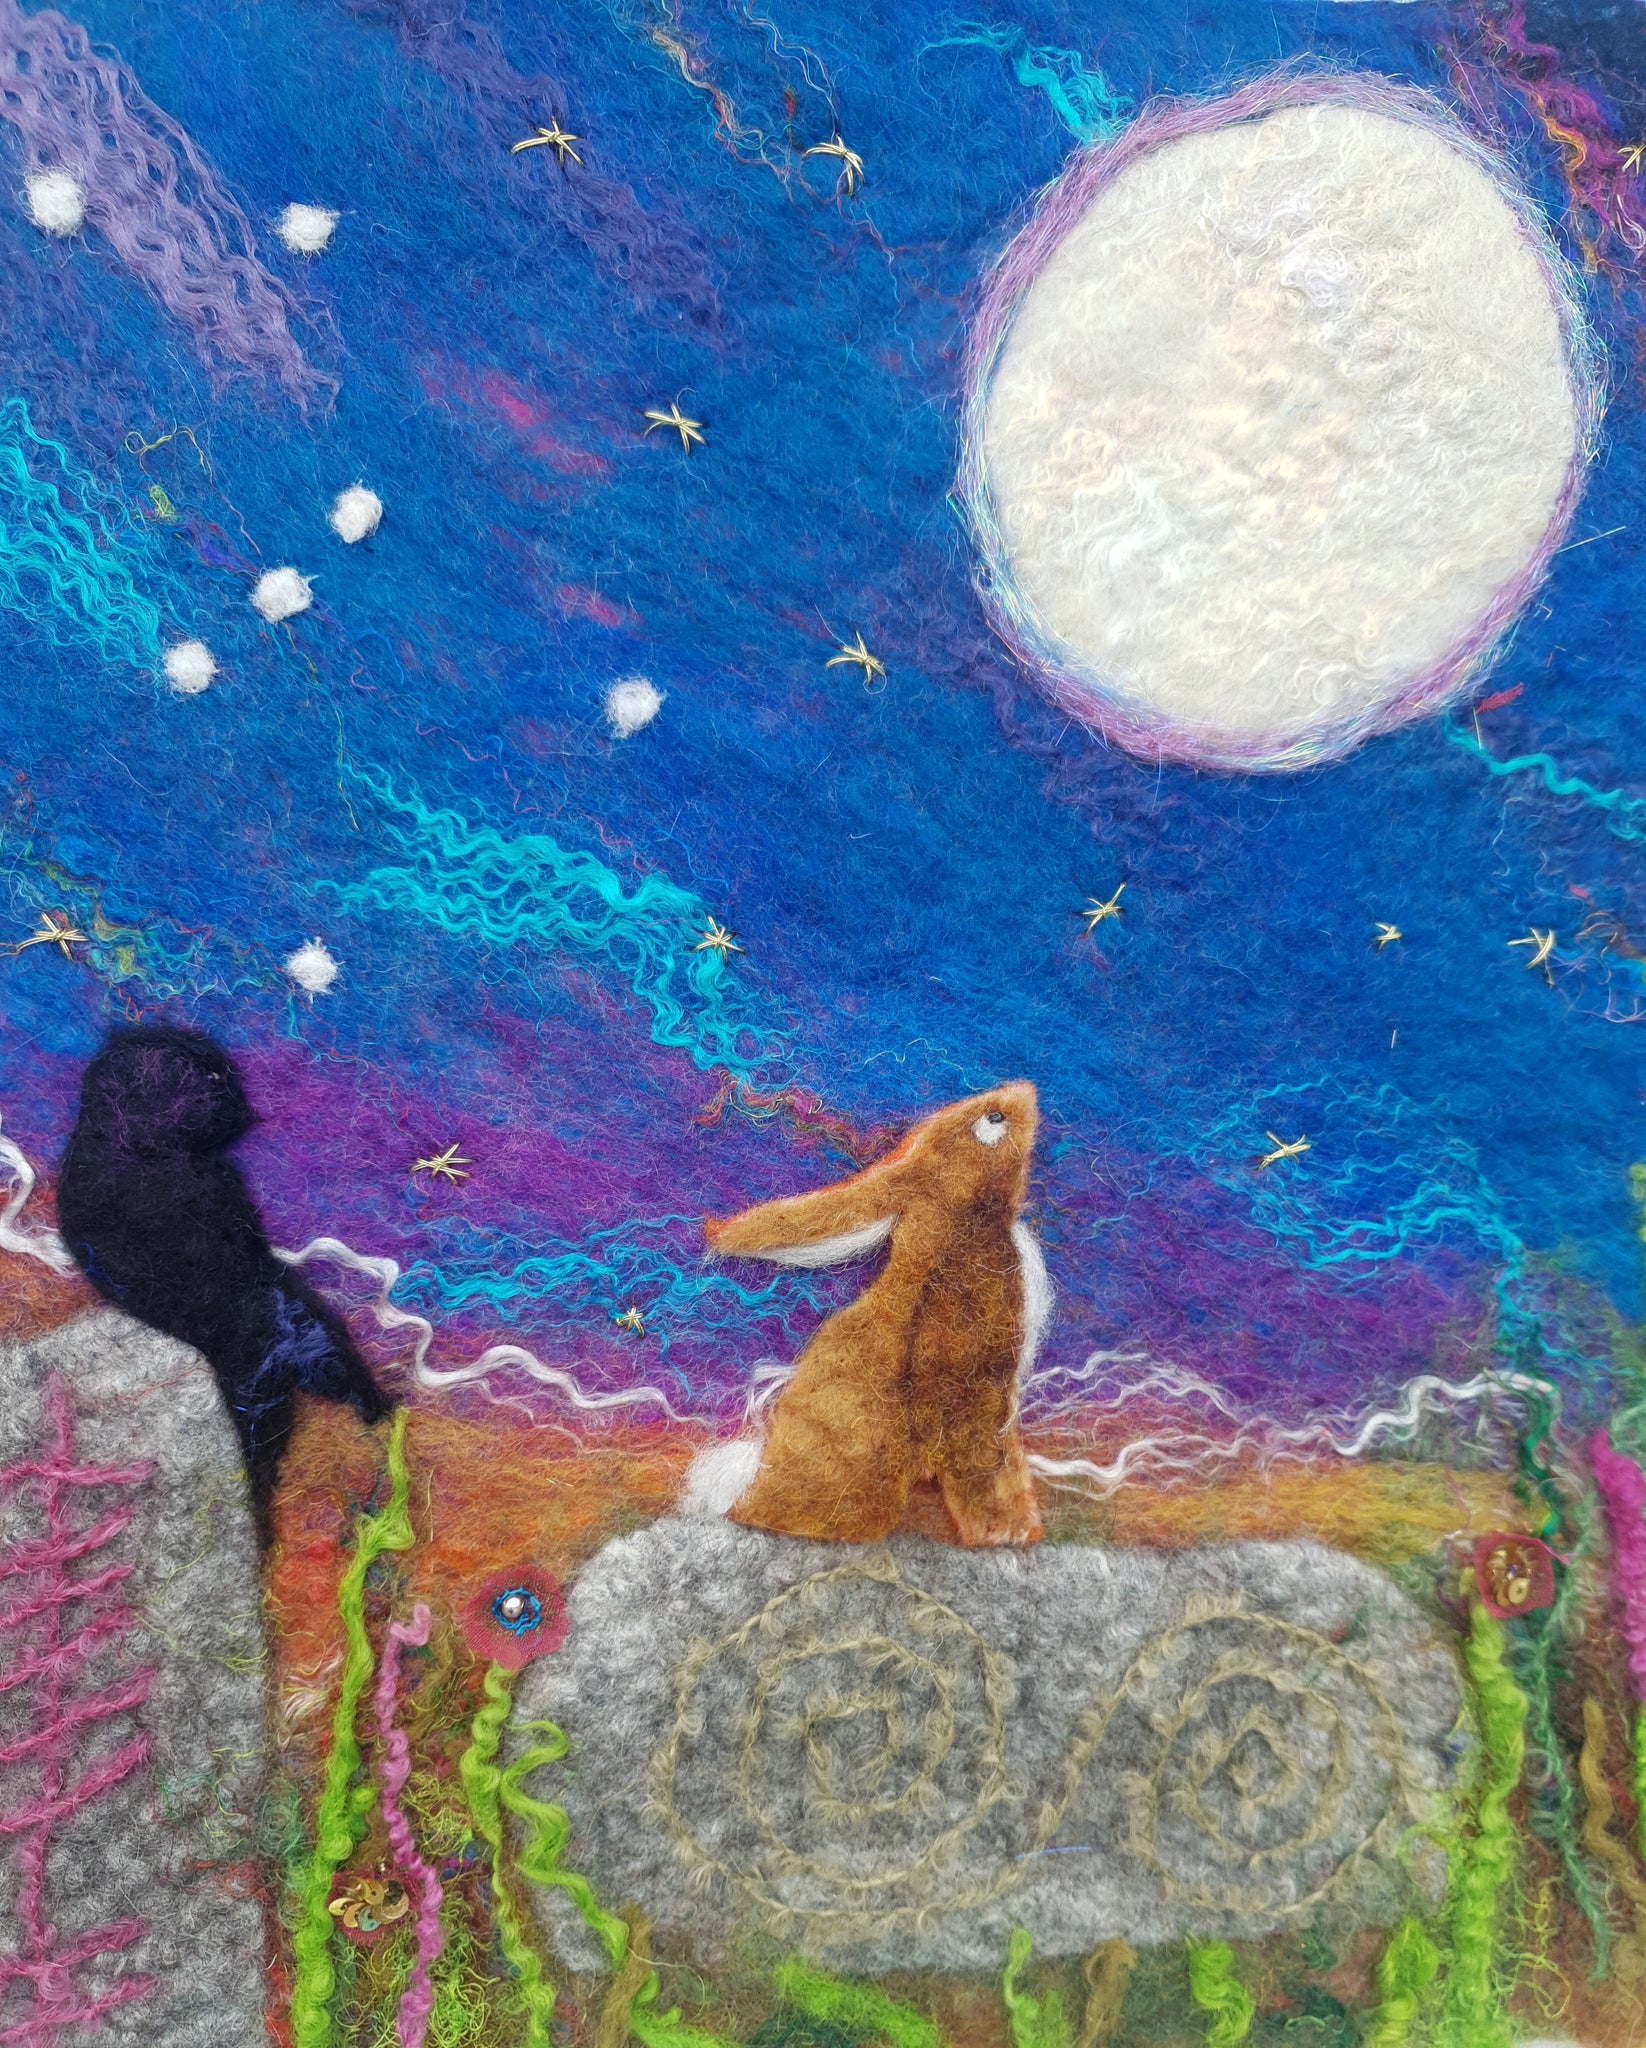 BY THE LIGHT OF THE SPARKLY MOON - An Original Artwork